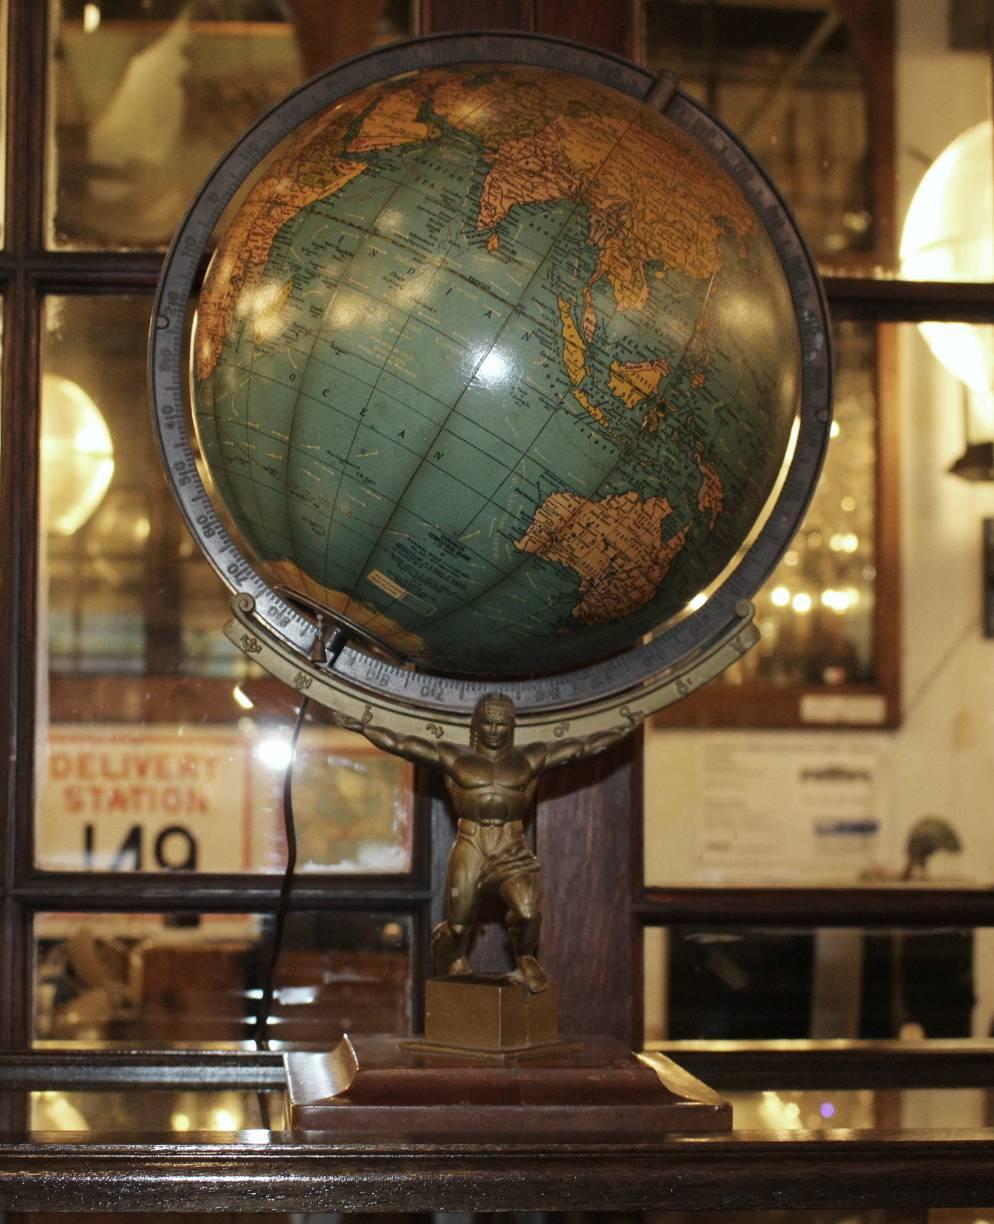 1949 Crams rare lit Art Deco style terrestrial table top globe made by The George F. Cram Co., Indianapolis, IN. Appears to be styled after statues found in Rockefeller Center. Lights up inside globe. This item can be viewed at our 149 Madison